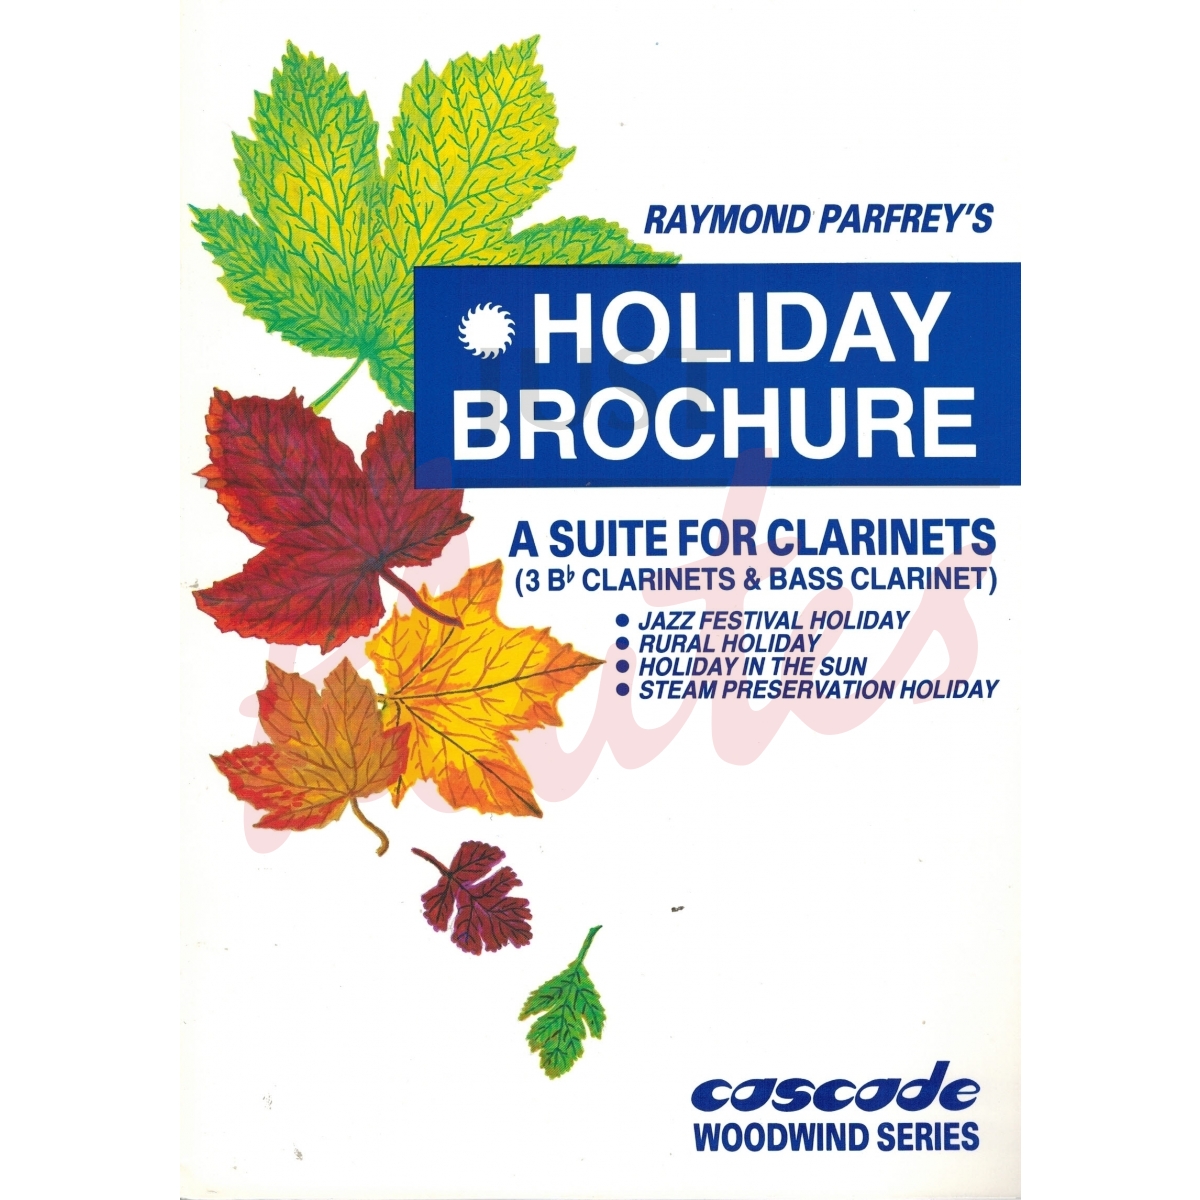 Holiday Brochure: A Suite for Clarinets